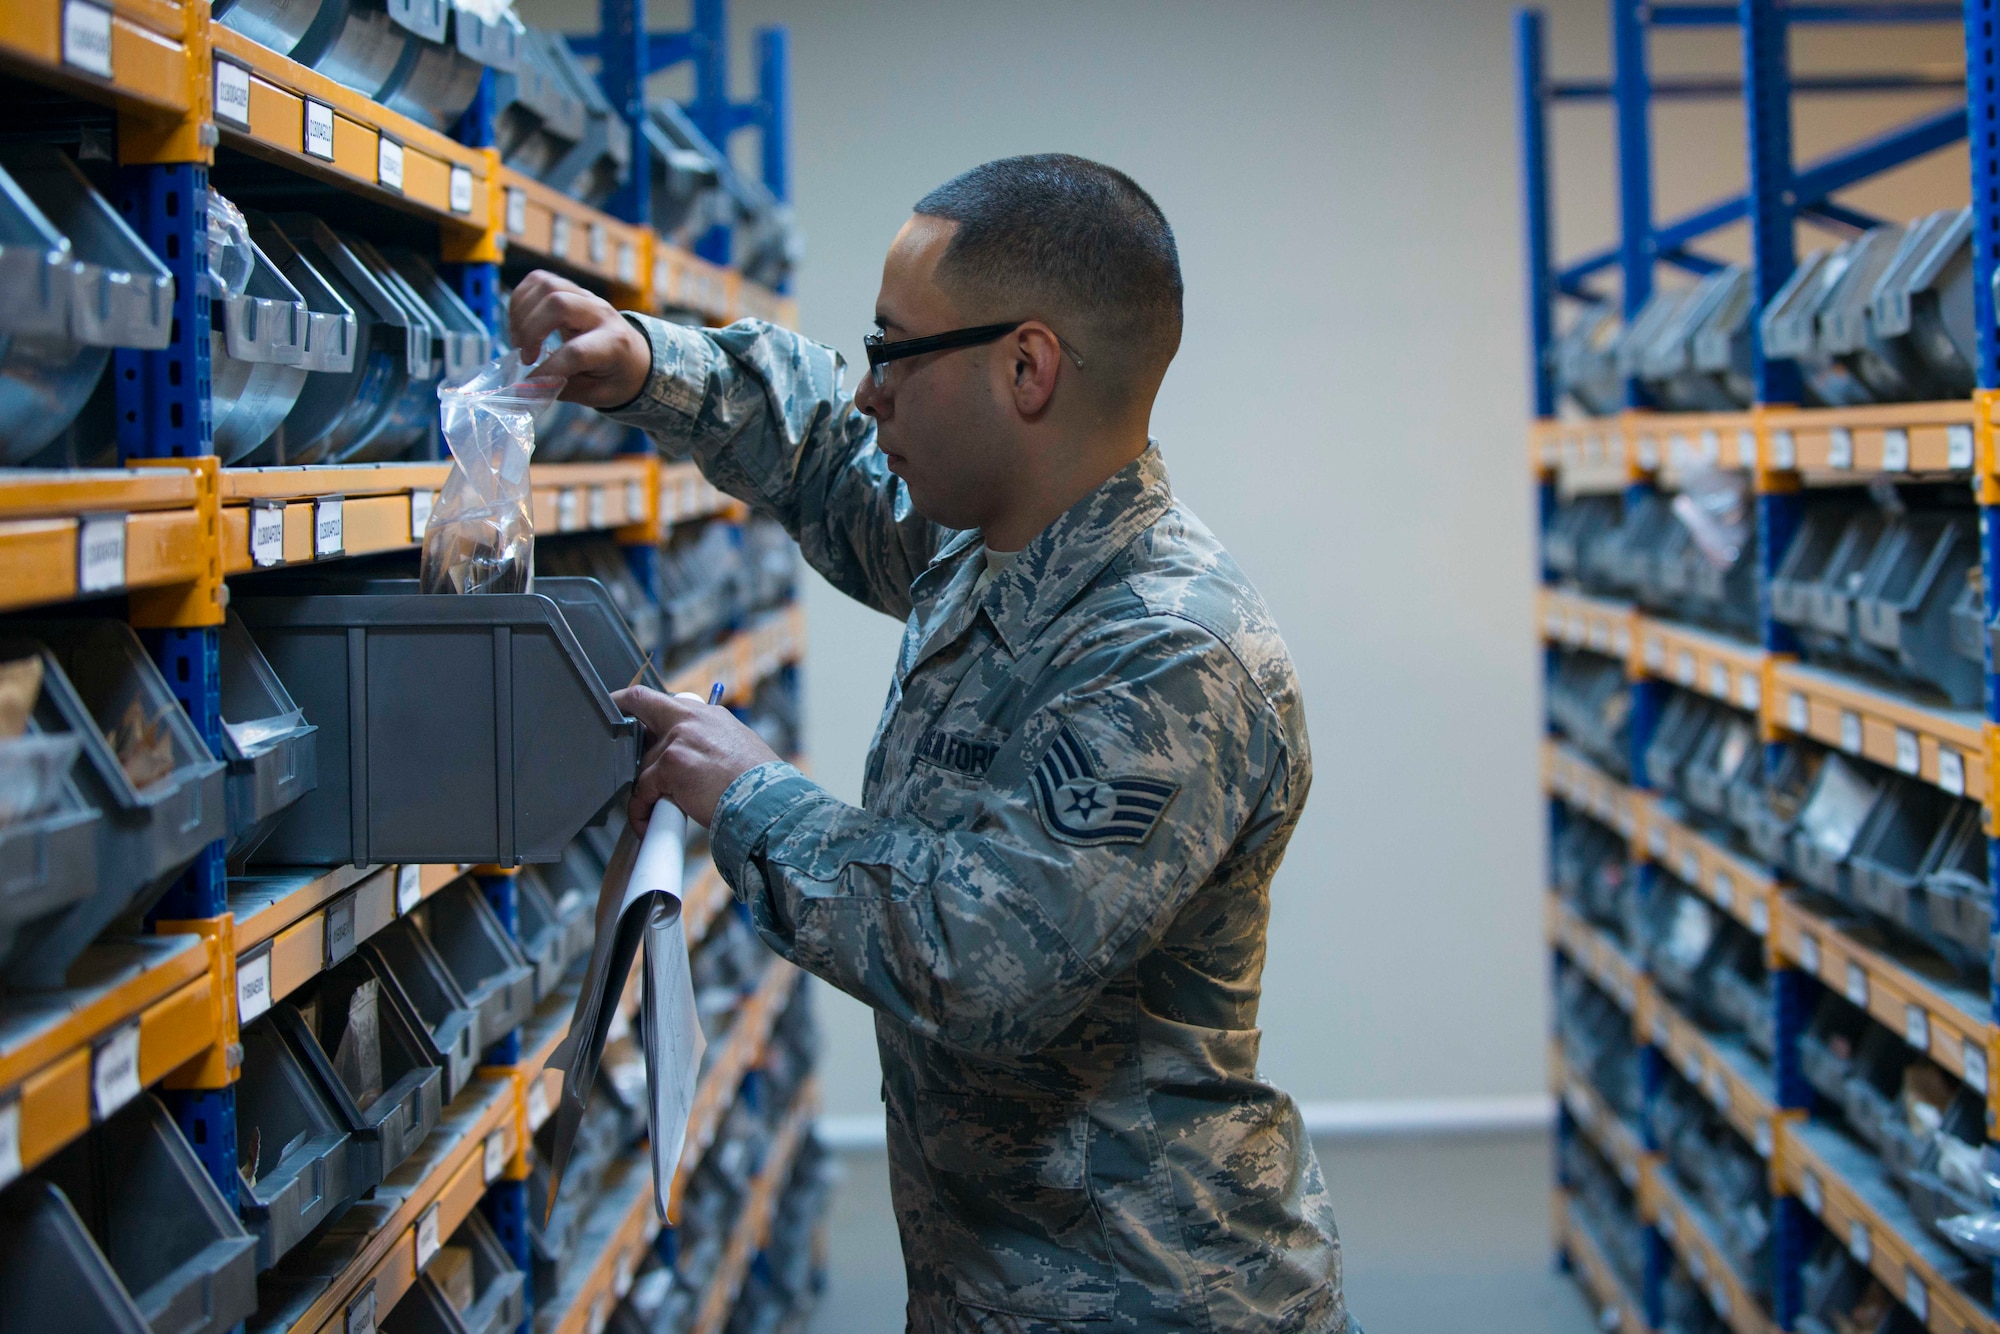 U.S. Air Force Staff Sgt. Ray Medrano, 39th Logistics Readiness Squadron central storage NCO in charge, inspects shelf life items in the supply warehouse Oct. 4, 2016, at Incirlik Air Base, Turkey. Supply Airmen keep accountability of resources and equipment and distribute items required for mission accomplishment across the base. (U.S. Air Force photo by Senior Airman John Nieves Camacho)